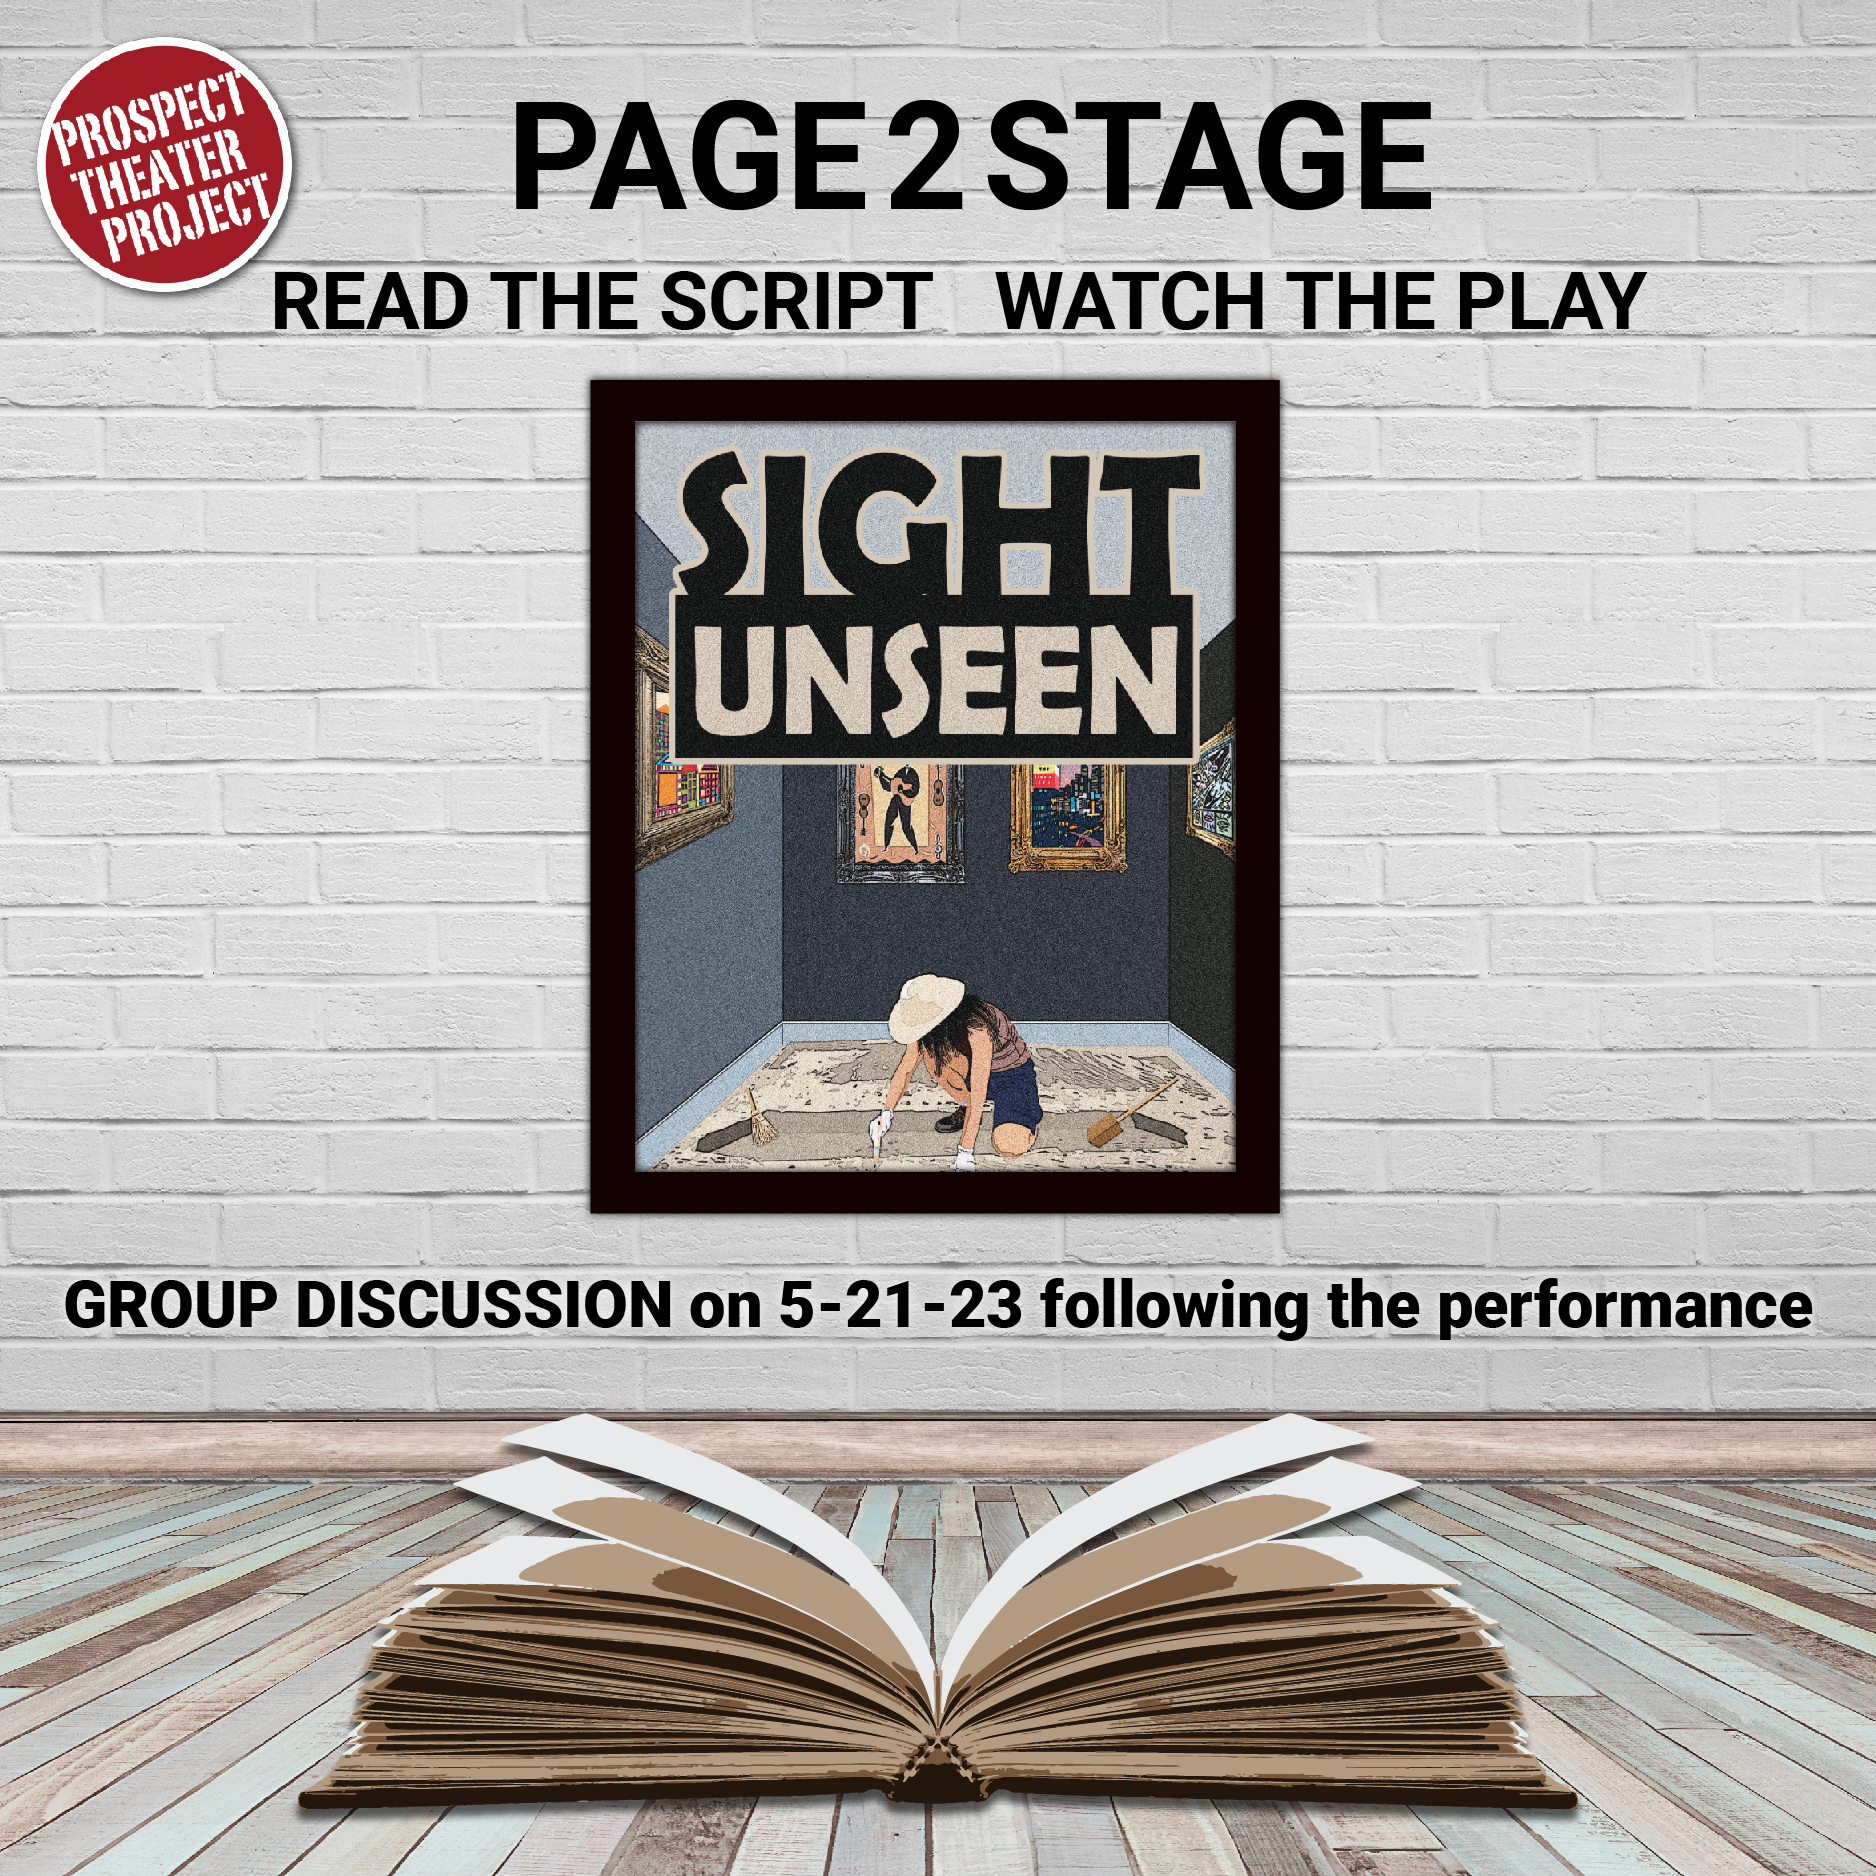 Page 2 Stage: Sight Unseen